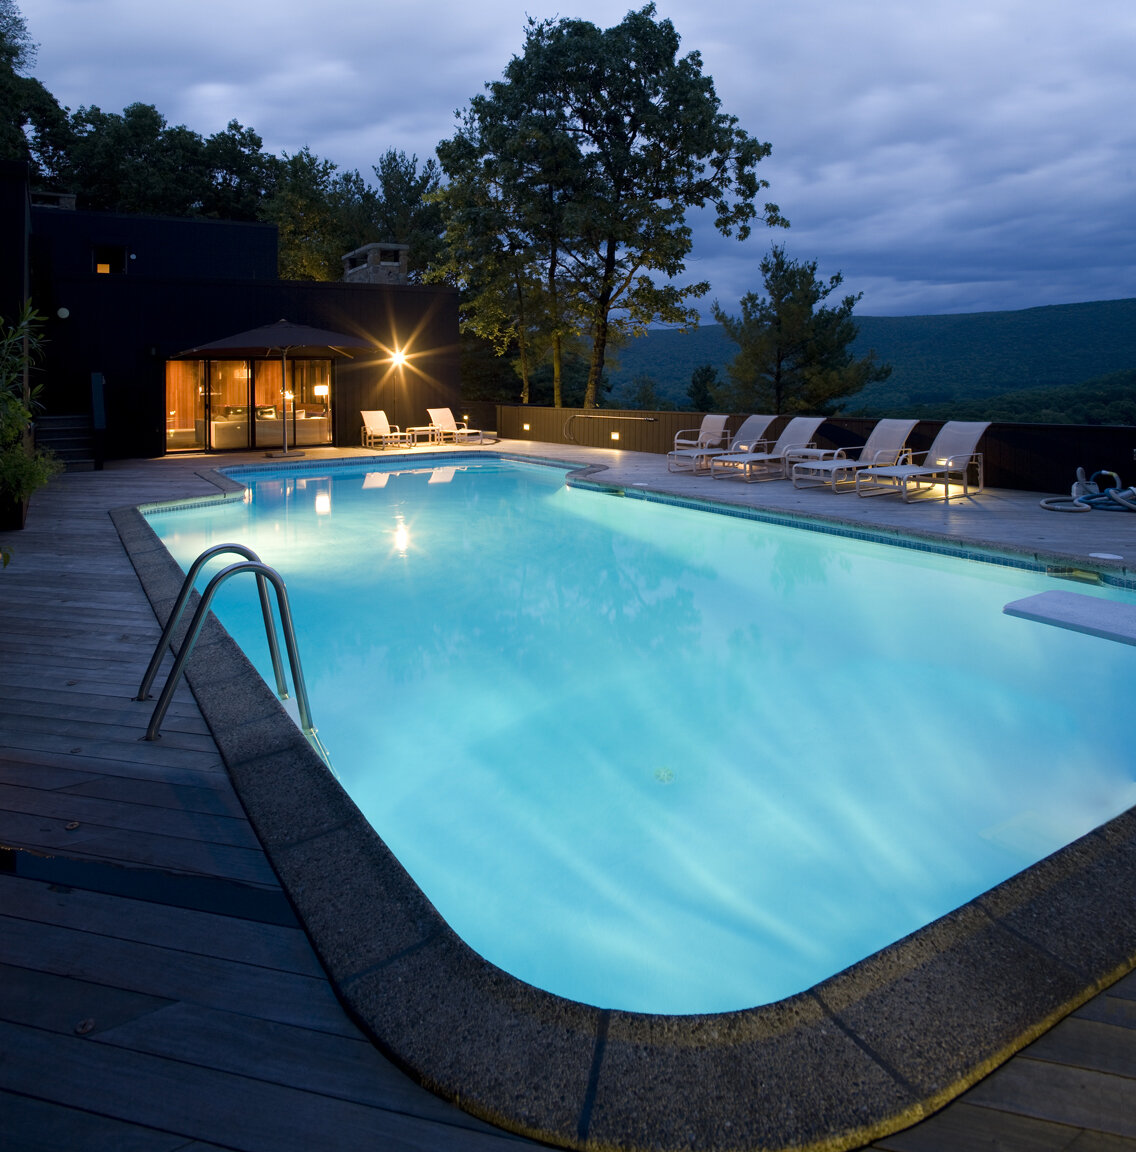  Peacock Hill Residence - Swimming Pool 